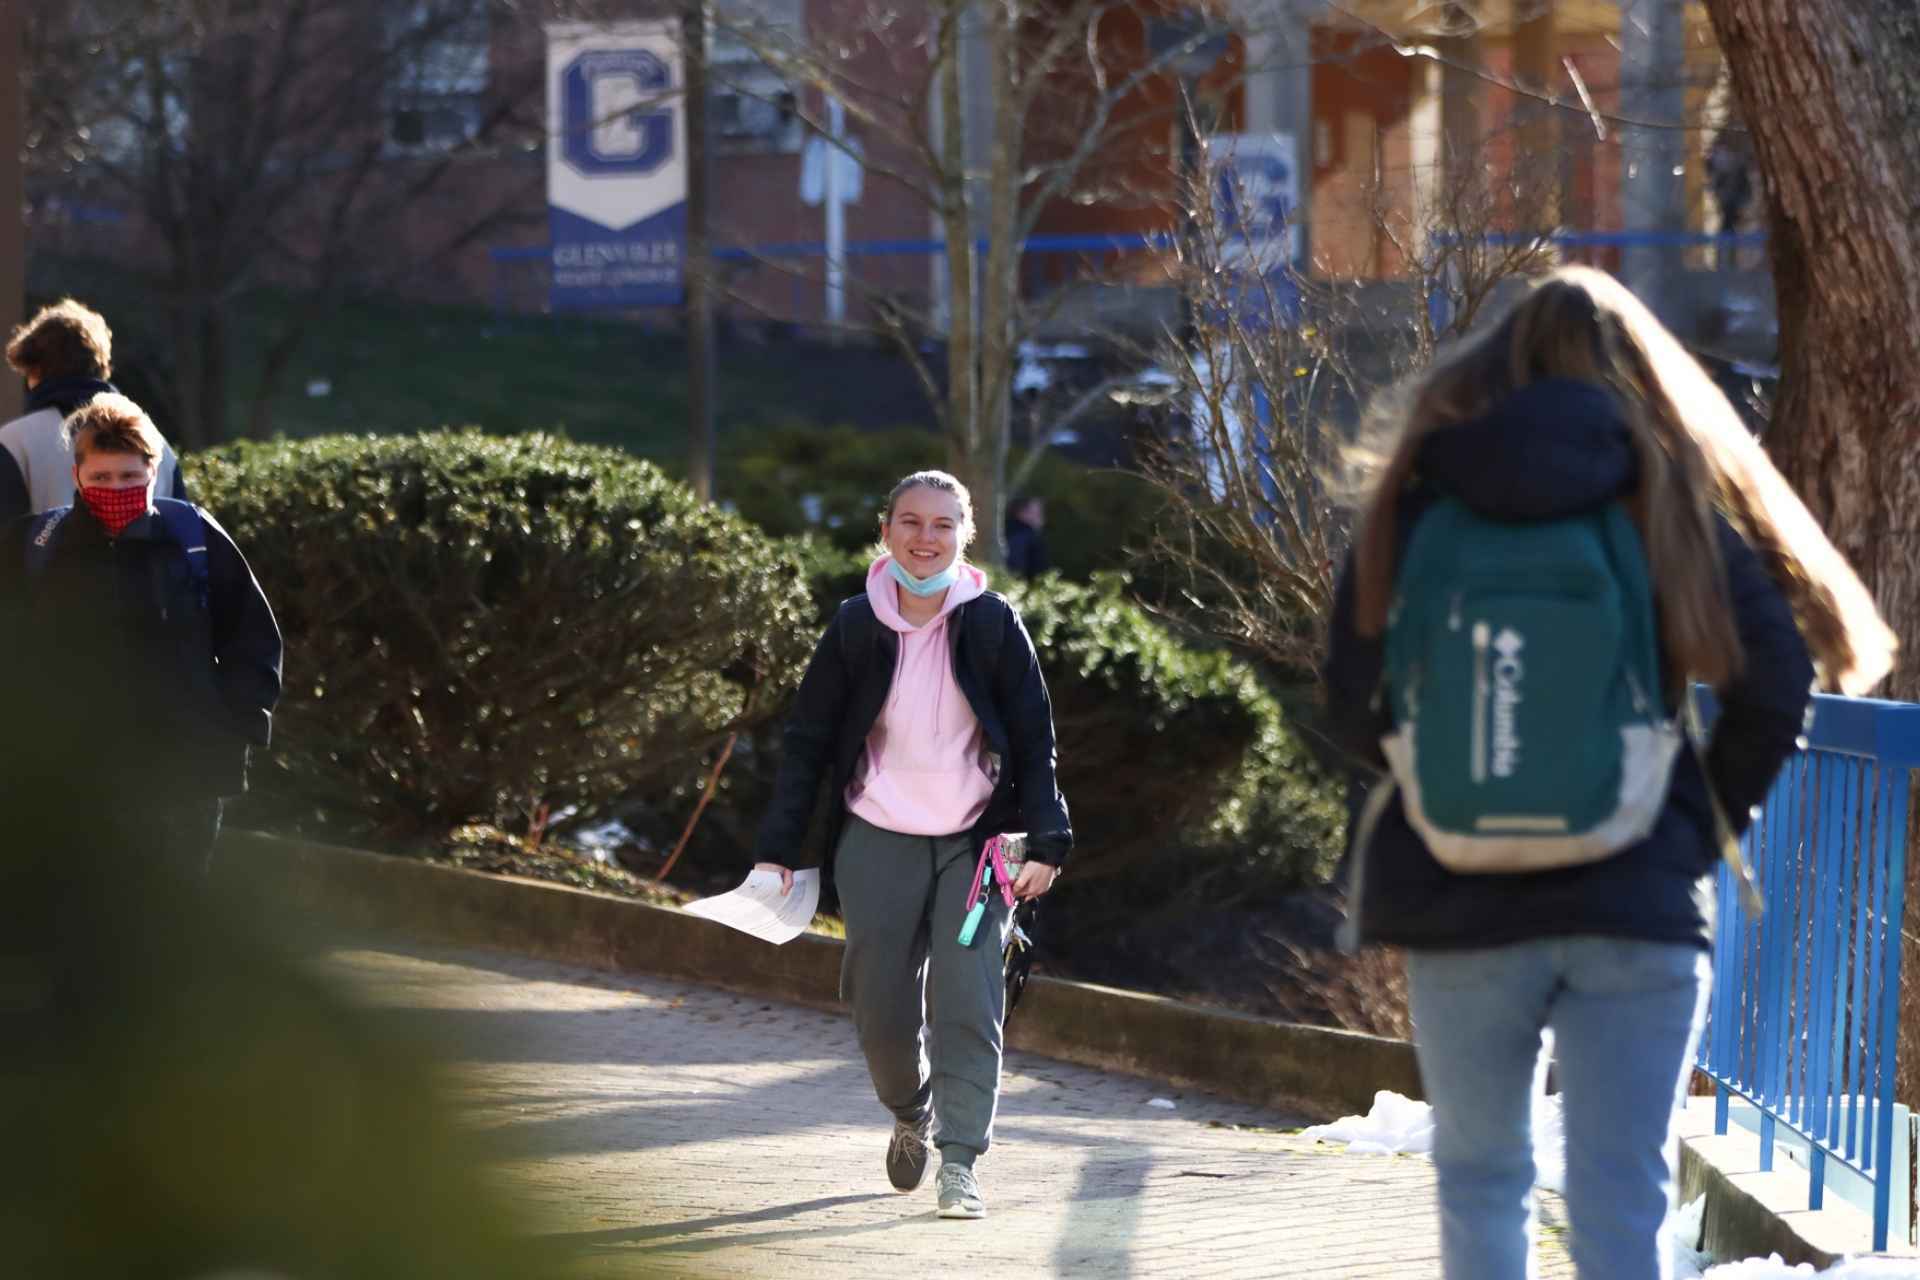 Students walk across Glenville State College’s campus on a chilly Monday, January 10, the first day of the spring 2022 semester.